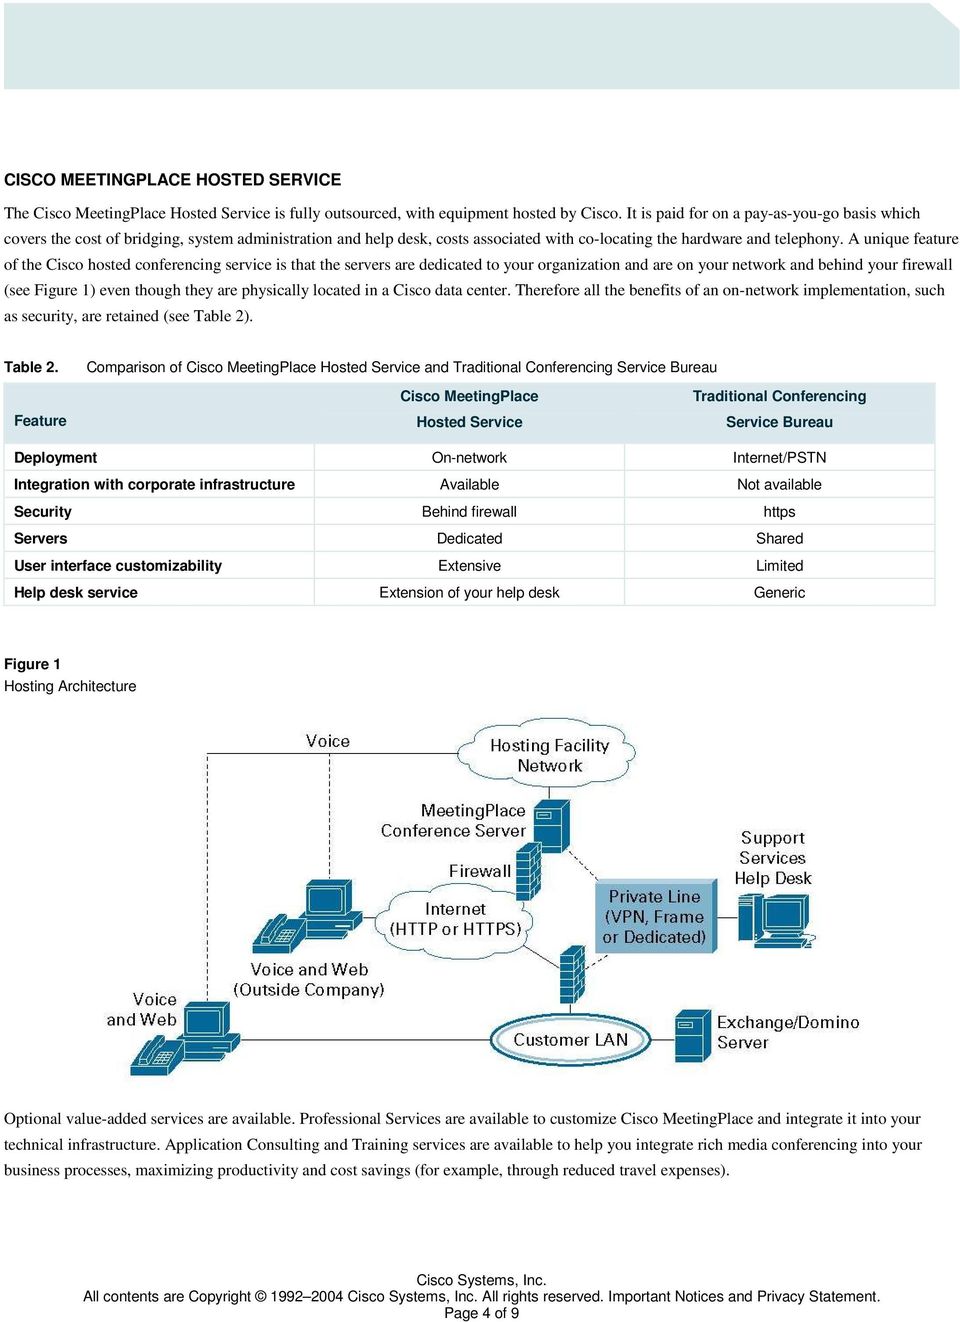 A unique feature of the Cisco hosted conferencing service is that the servers are dedicated to your organization and are on your network and behind your firewall (see Figure 1) even though they are